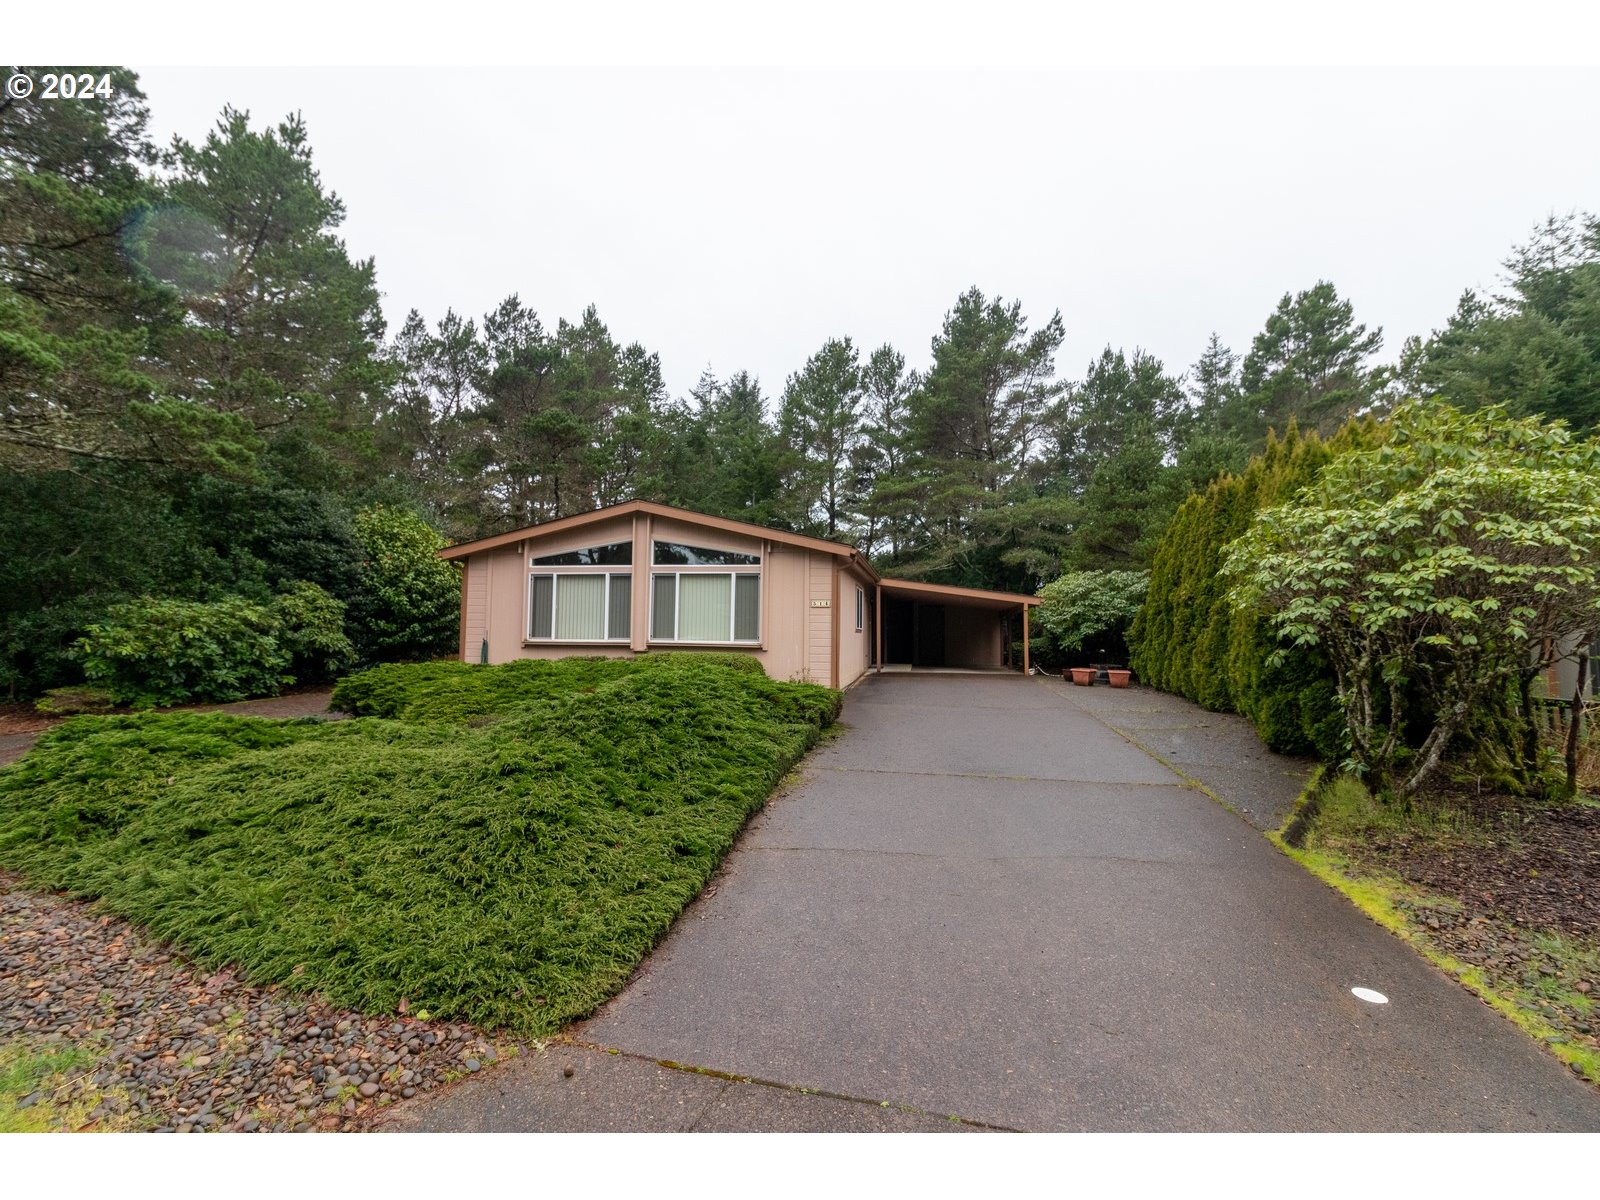 1601 RHODODENDRON DR 514, Florence, OR 